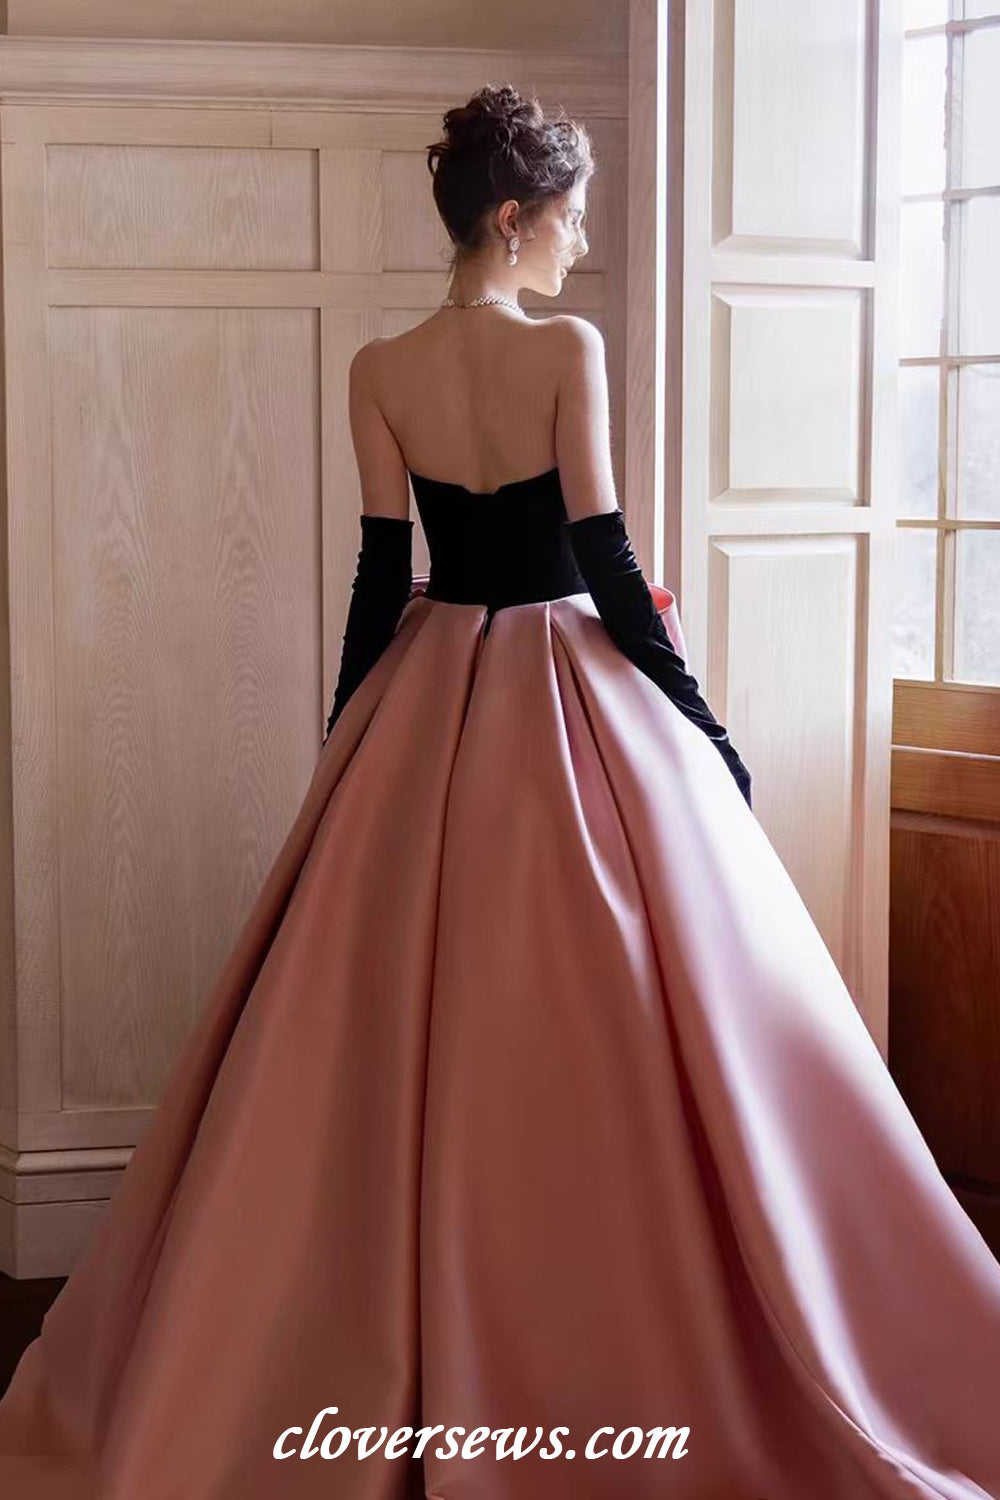 Black Velvet Top Pink Satin With Bowknot Ball Gown Prom Gown With Long Gloves,CP1143